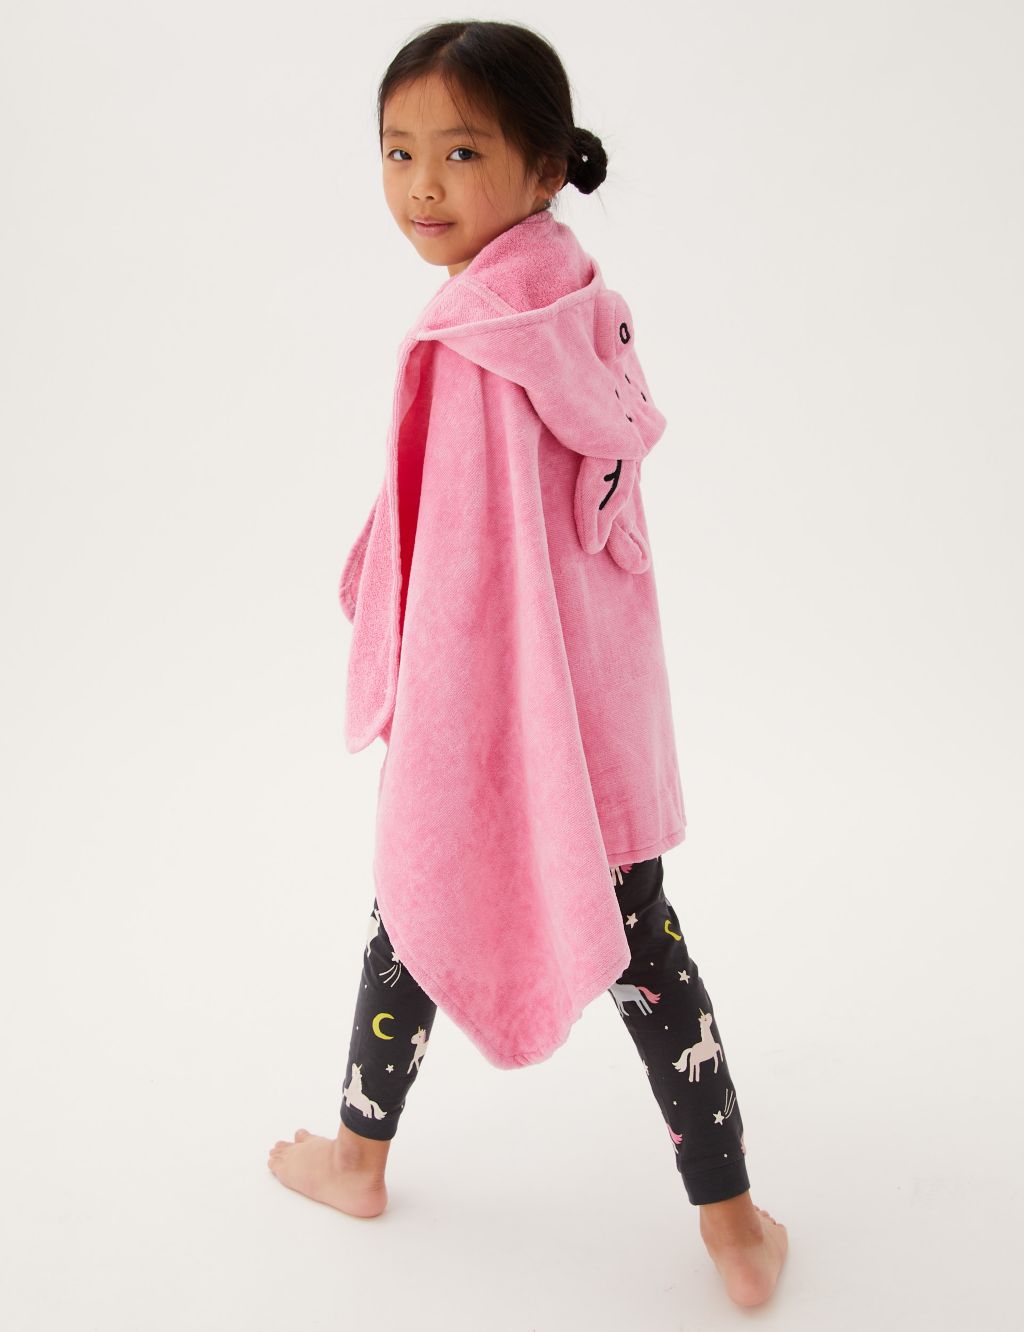 Pure Cotton Percy Pig™ Kids Hooded Towel image 5